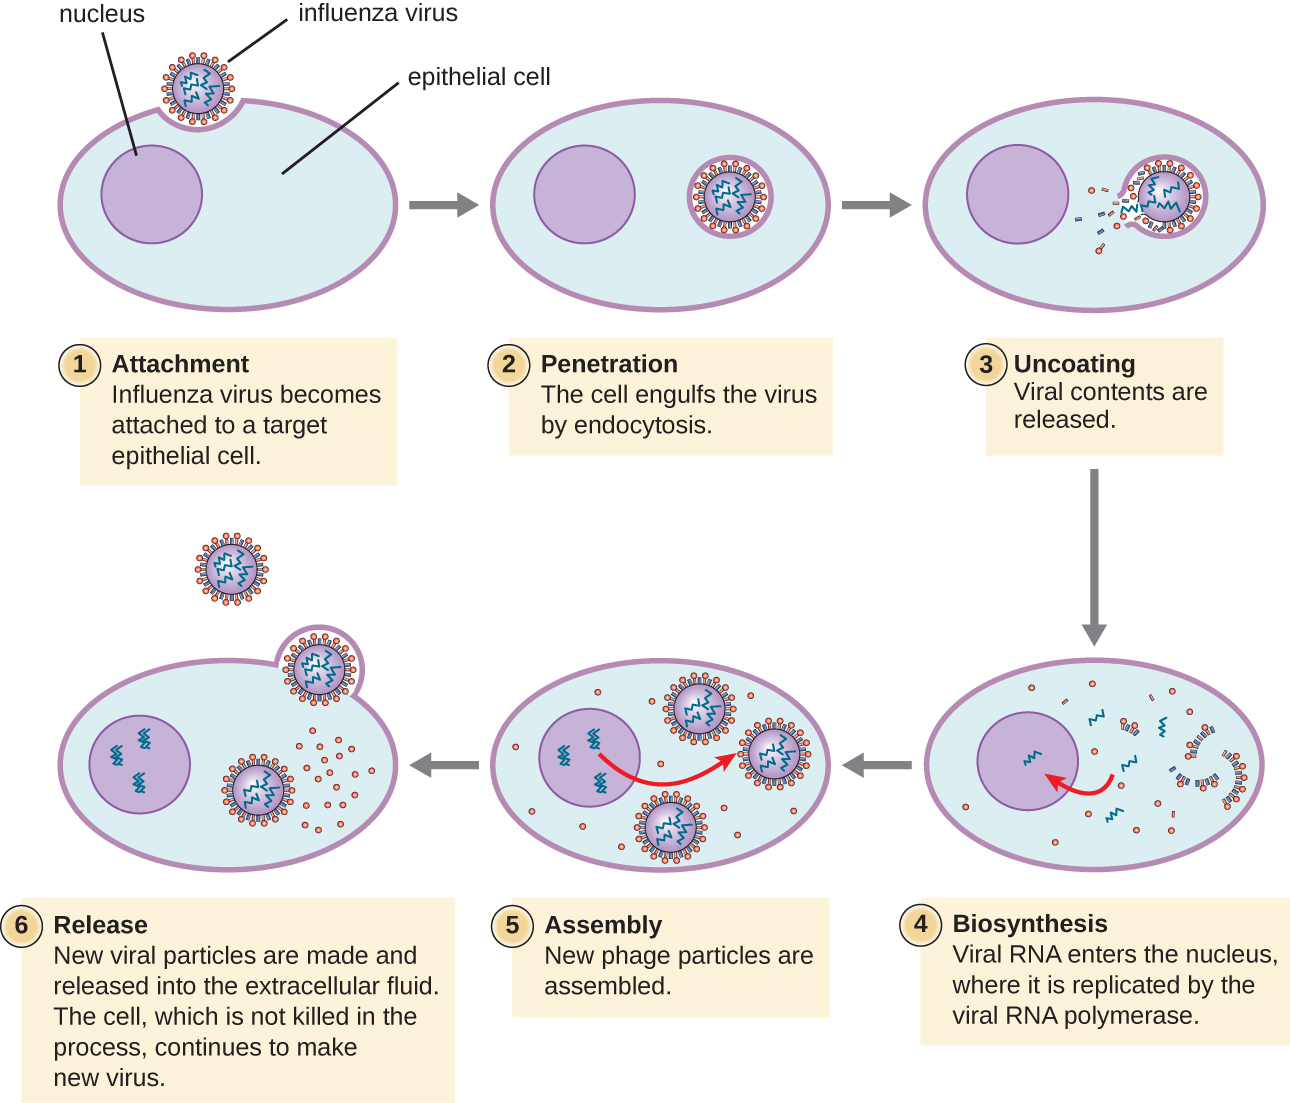 Steps of influenza infection. Step 1 is attachment when the influenza virus becomes attached to a target epithelial cell. This image shows a spherical virus binding to the surface of a host cell. Step 2 is penetration when the cell engulfs the virus by endocytosis; this shows the virus within a vacuole. Step 3 is uncoating when the viral contents are released; the image shows the virus being released from the vacuole. Step 4 is biosynthesis when the viral RNA enters the nucleus where it is replicated by RNA polymerase. Step 5 is assembly when the new phage particles are assembled. Step 6 is release when new viral particles are made and released into the extracellular fluid. The cell, which is not killed in the process continues to make new viruses.